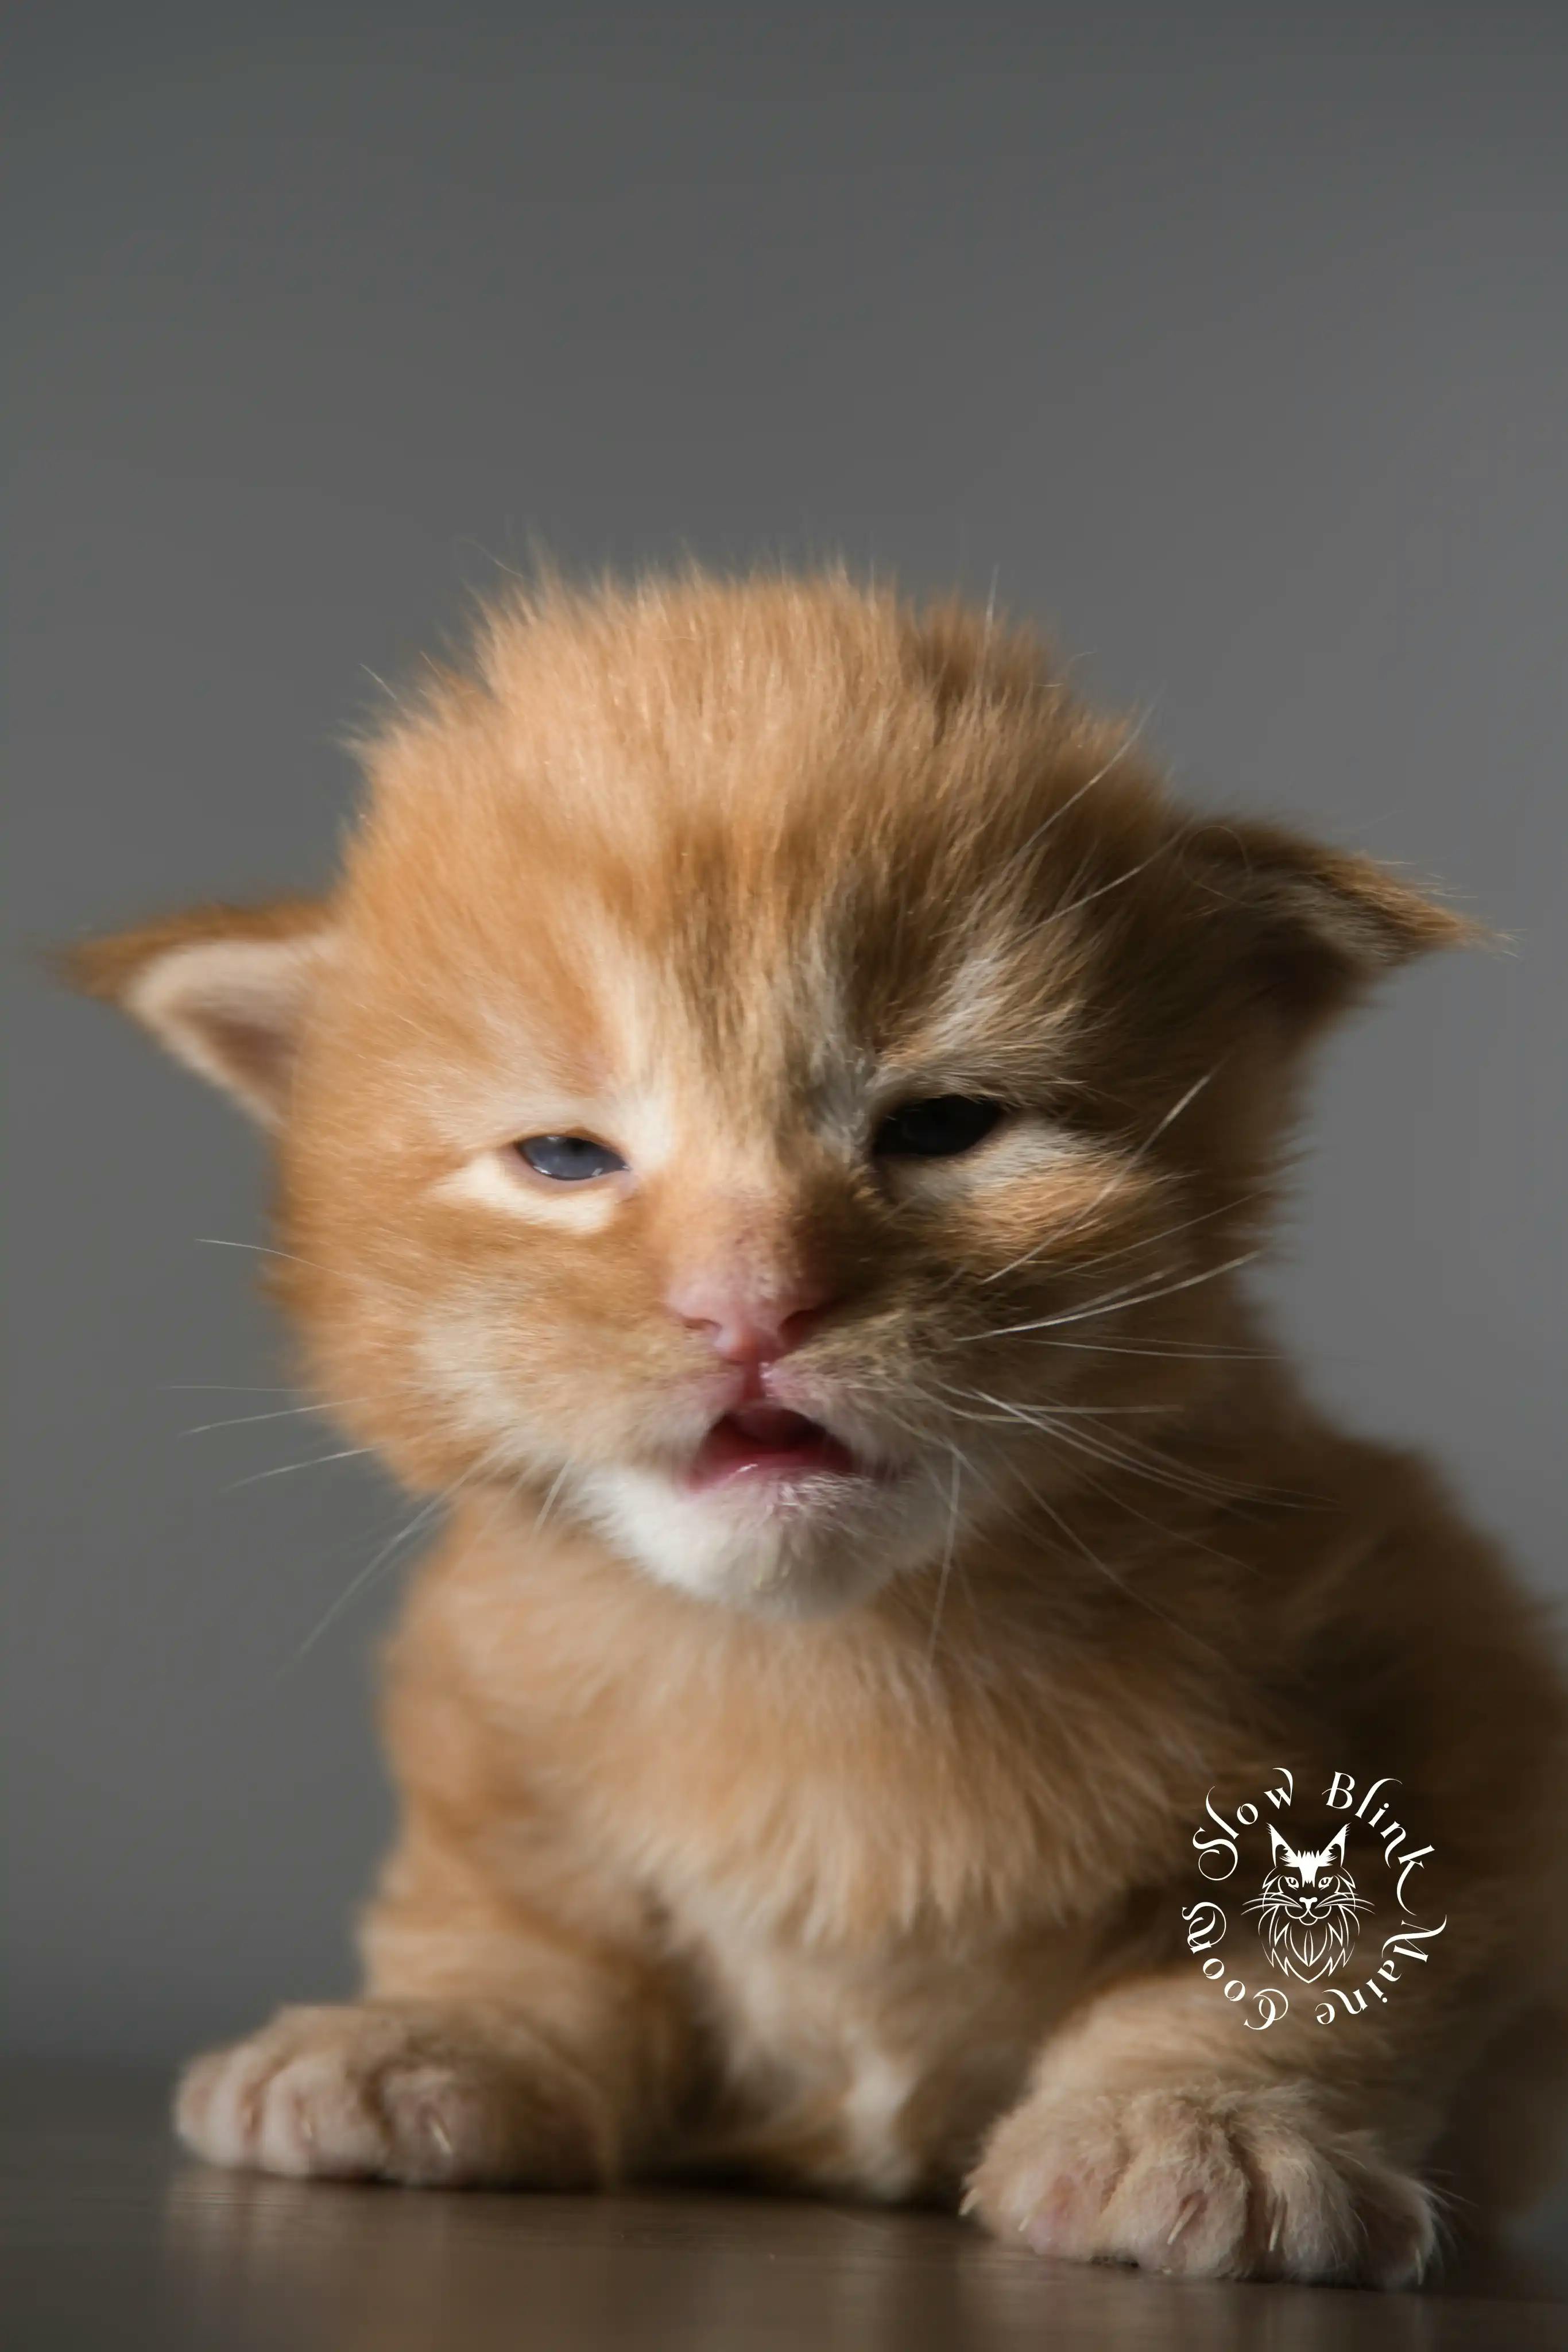 Orange (Red) Maine Coon Kittens > red orange maine coon kitten | slowblinkmainecoons | ems code d ds ds 22 4